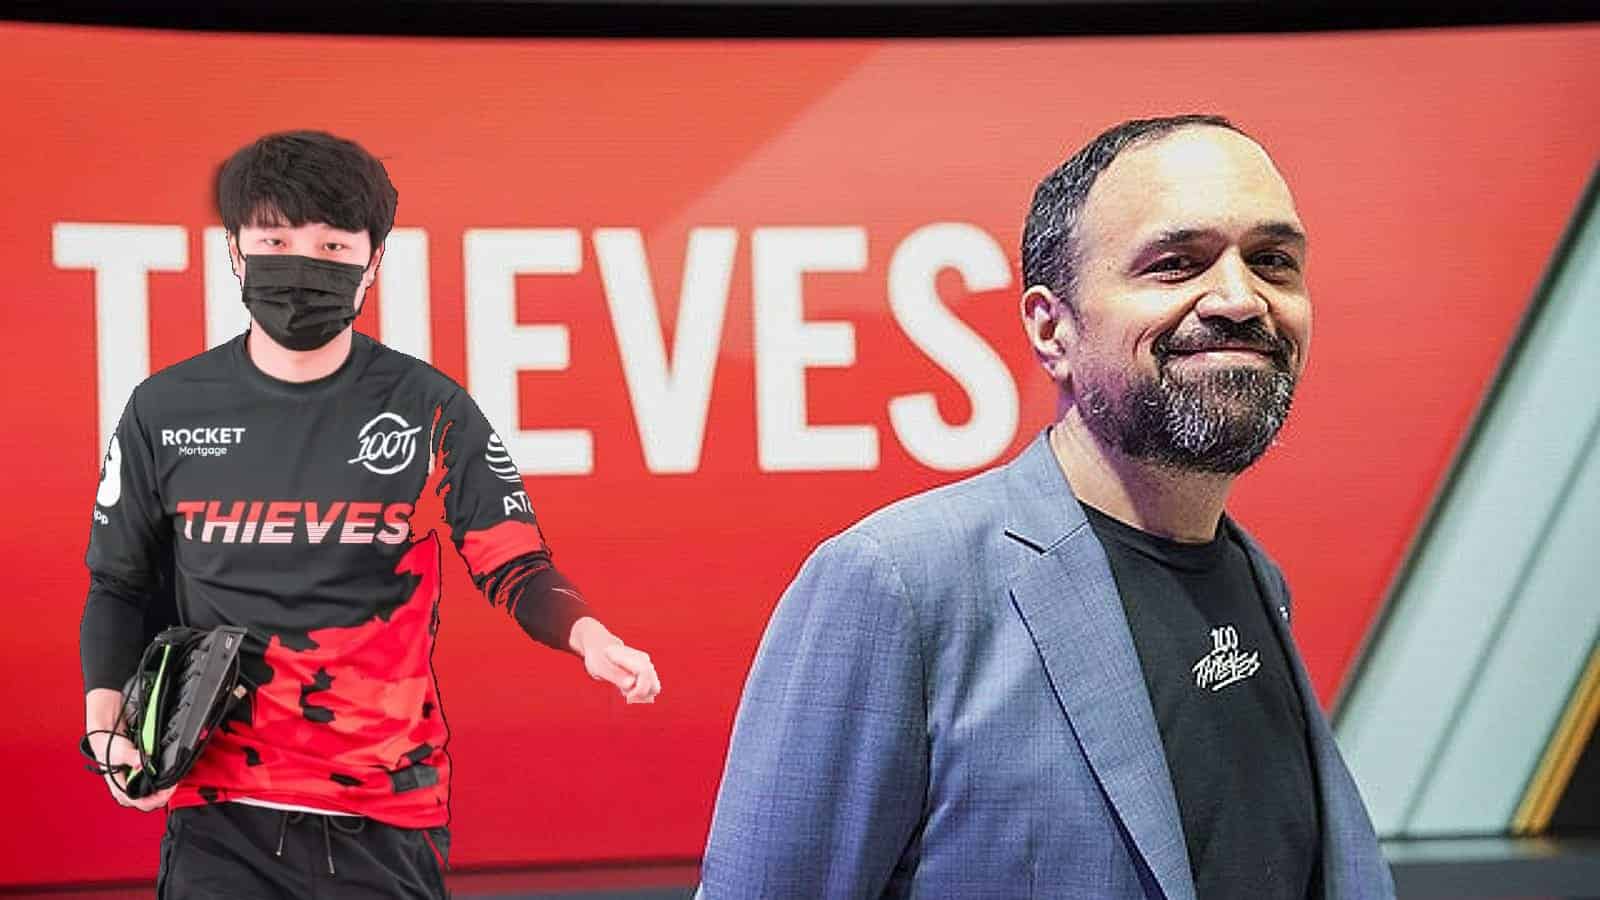 Cloud9 win the 2022 LCS Championship over 100 Thieves - Inven Global